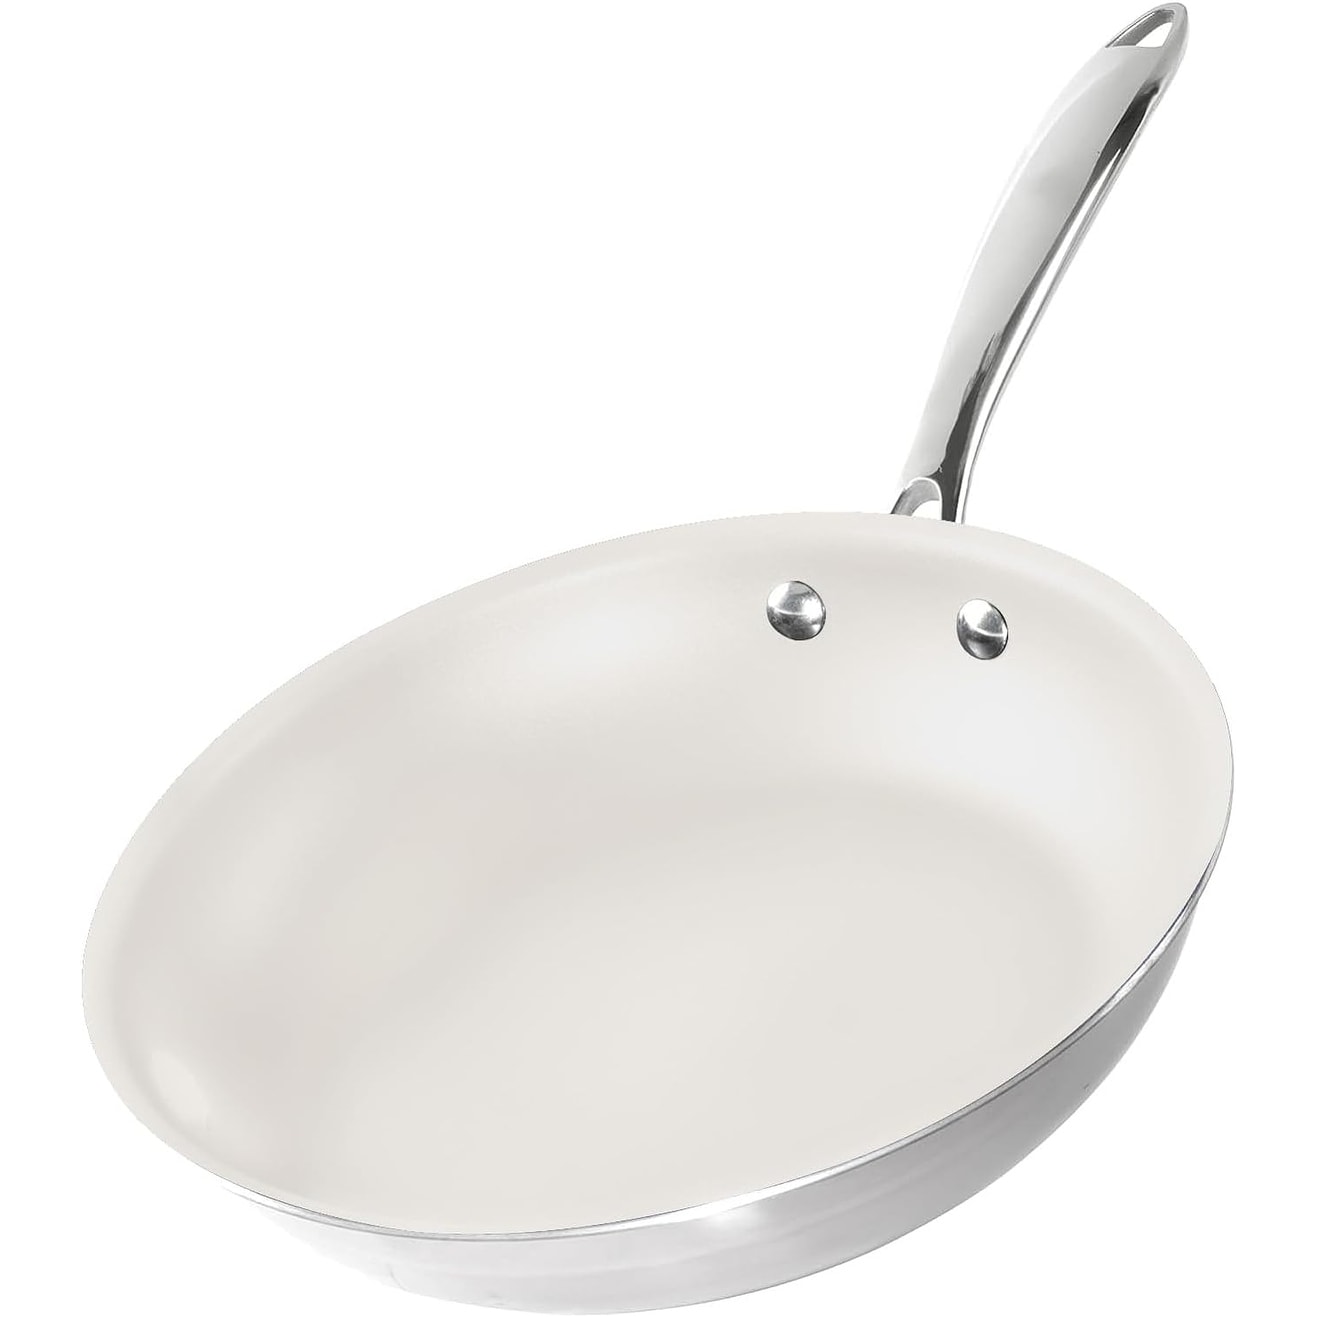 https://ak1.ostkcdn.com/images/products/is/images/direct/50027c5e7cc906db6dfe32bb4d2e0a99cd0cc1fa/Gotham-Steel-10%22-Heavy-Duty-Ceramic-Nonstick-Cream-Fry-Pan-Skillet-Stay-Cool-Handles.jpg